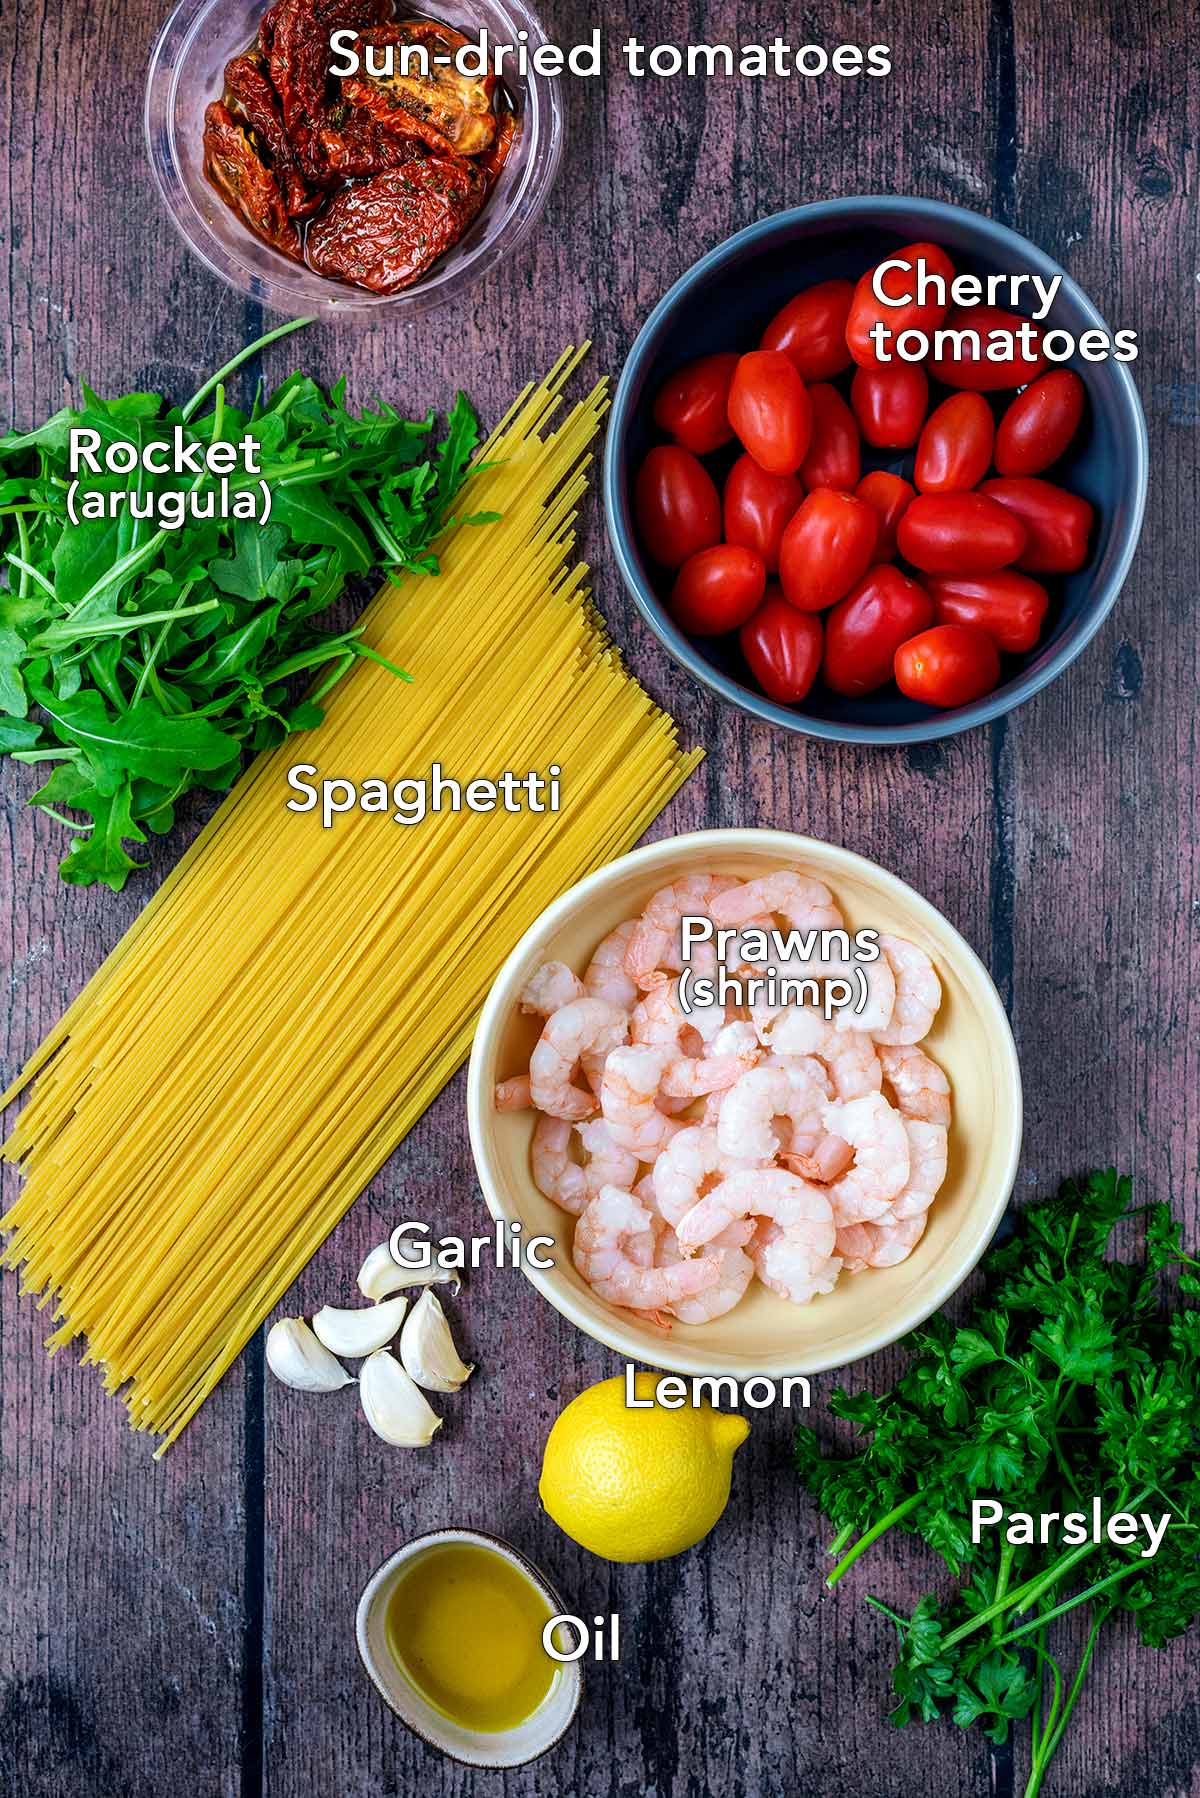 All the ingredients for this recipe with text overlay labels.